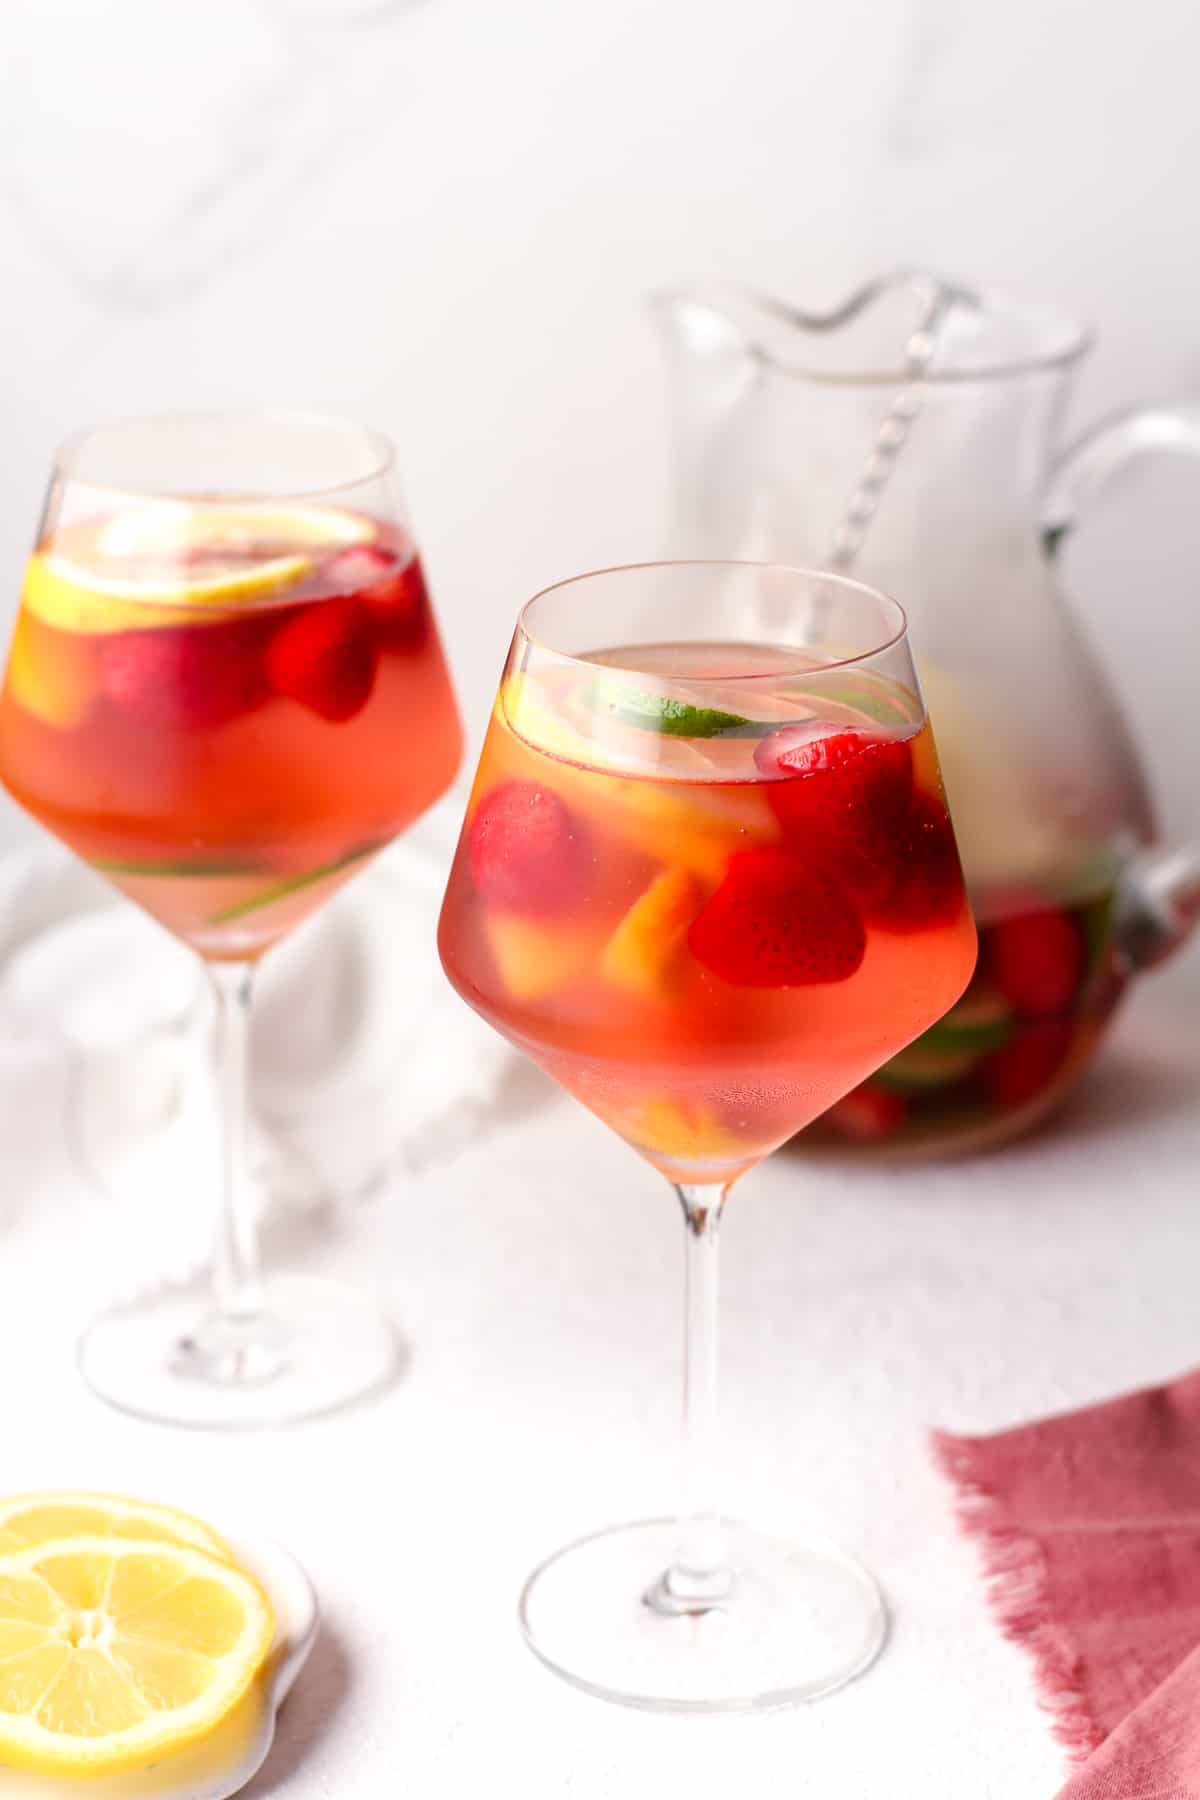 Side view of two glasses of sangria on a white background.